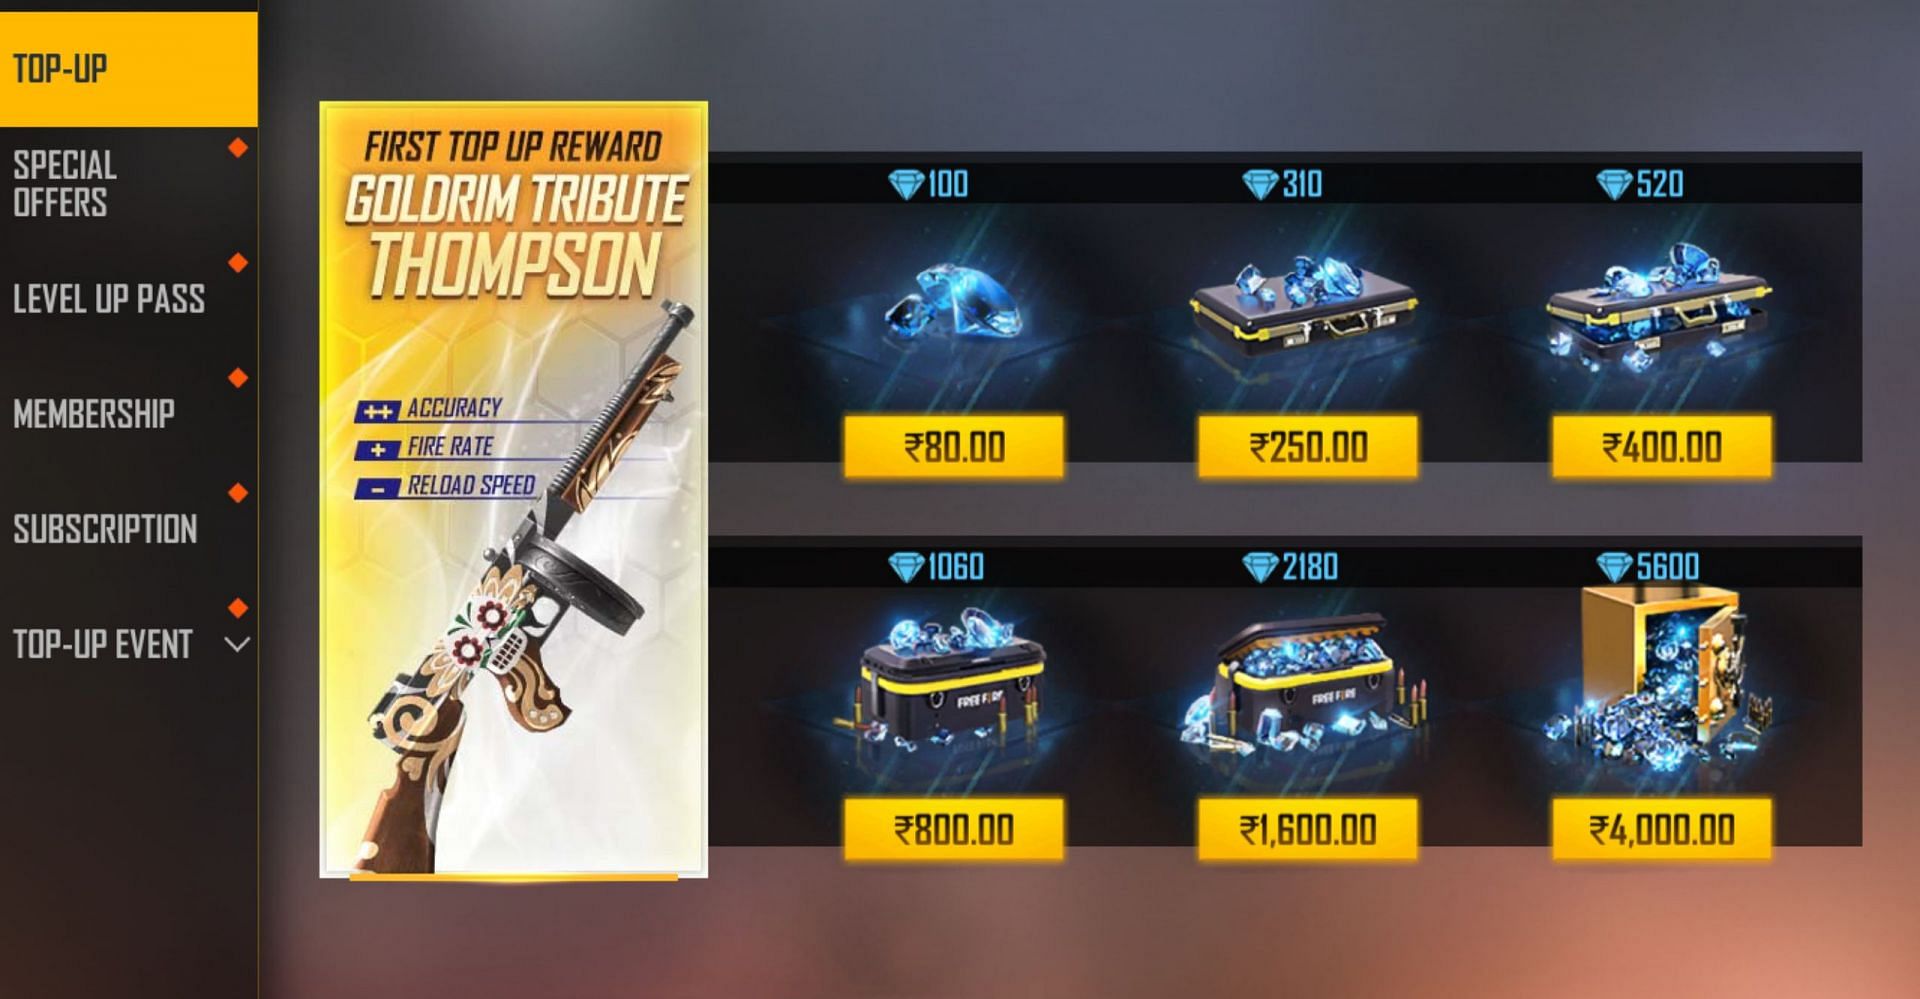 Users can purchase diamonds based on their requirements (Image via Garena)